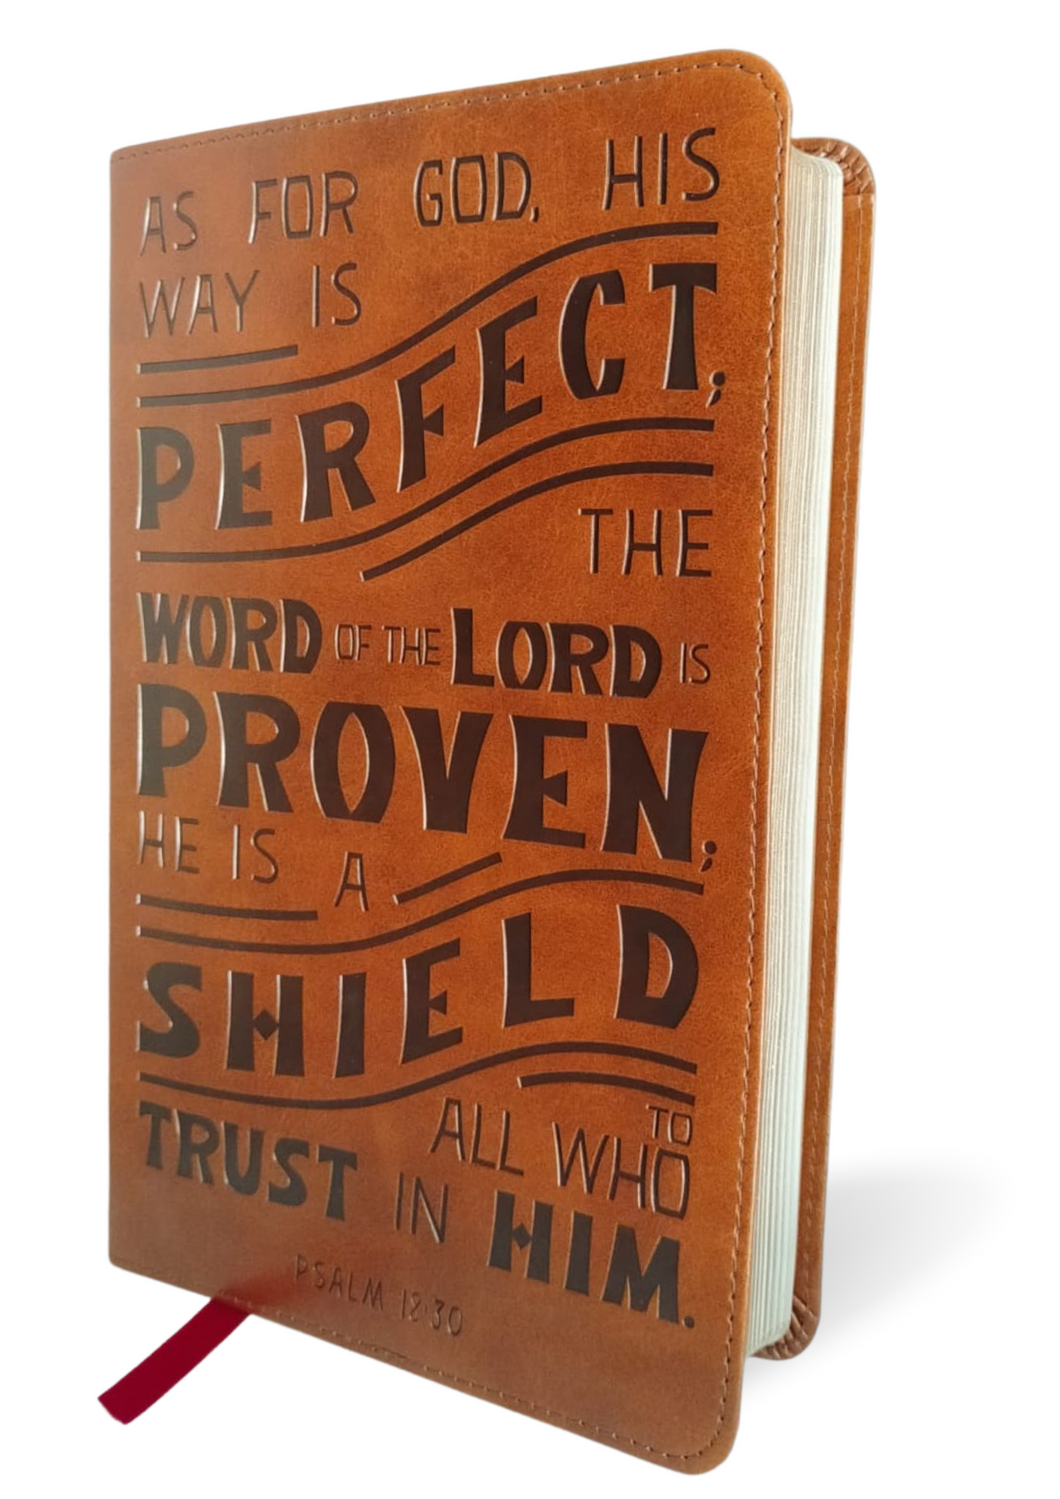 NKJV, Personal Size Reference Bible, Verse Art Cover Collection, Leathersoft, Tan leather, Red Letter, Comfort Print: Holy Bible, New King James Version Imitation Leather. Simple/ Thumb Indexed